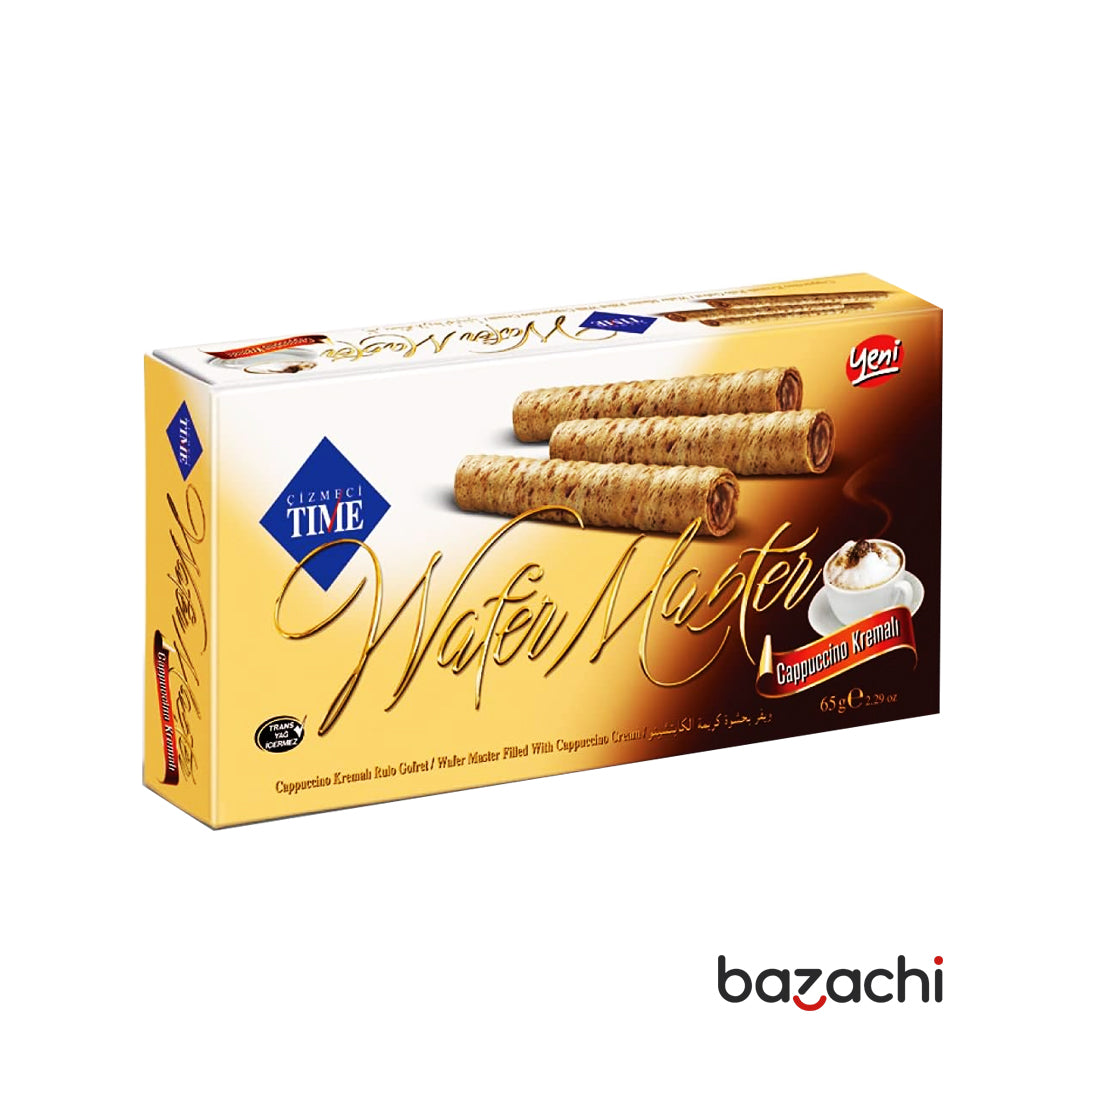 Wafer Master Roll With Cappuccino Flavored 15 Rolls 65g - Gofret